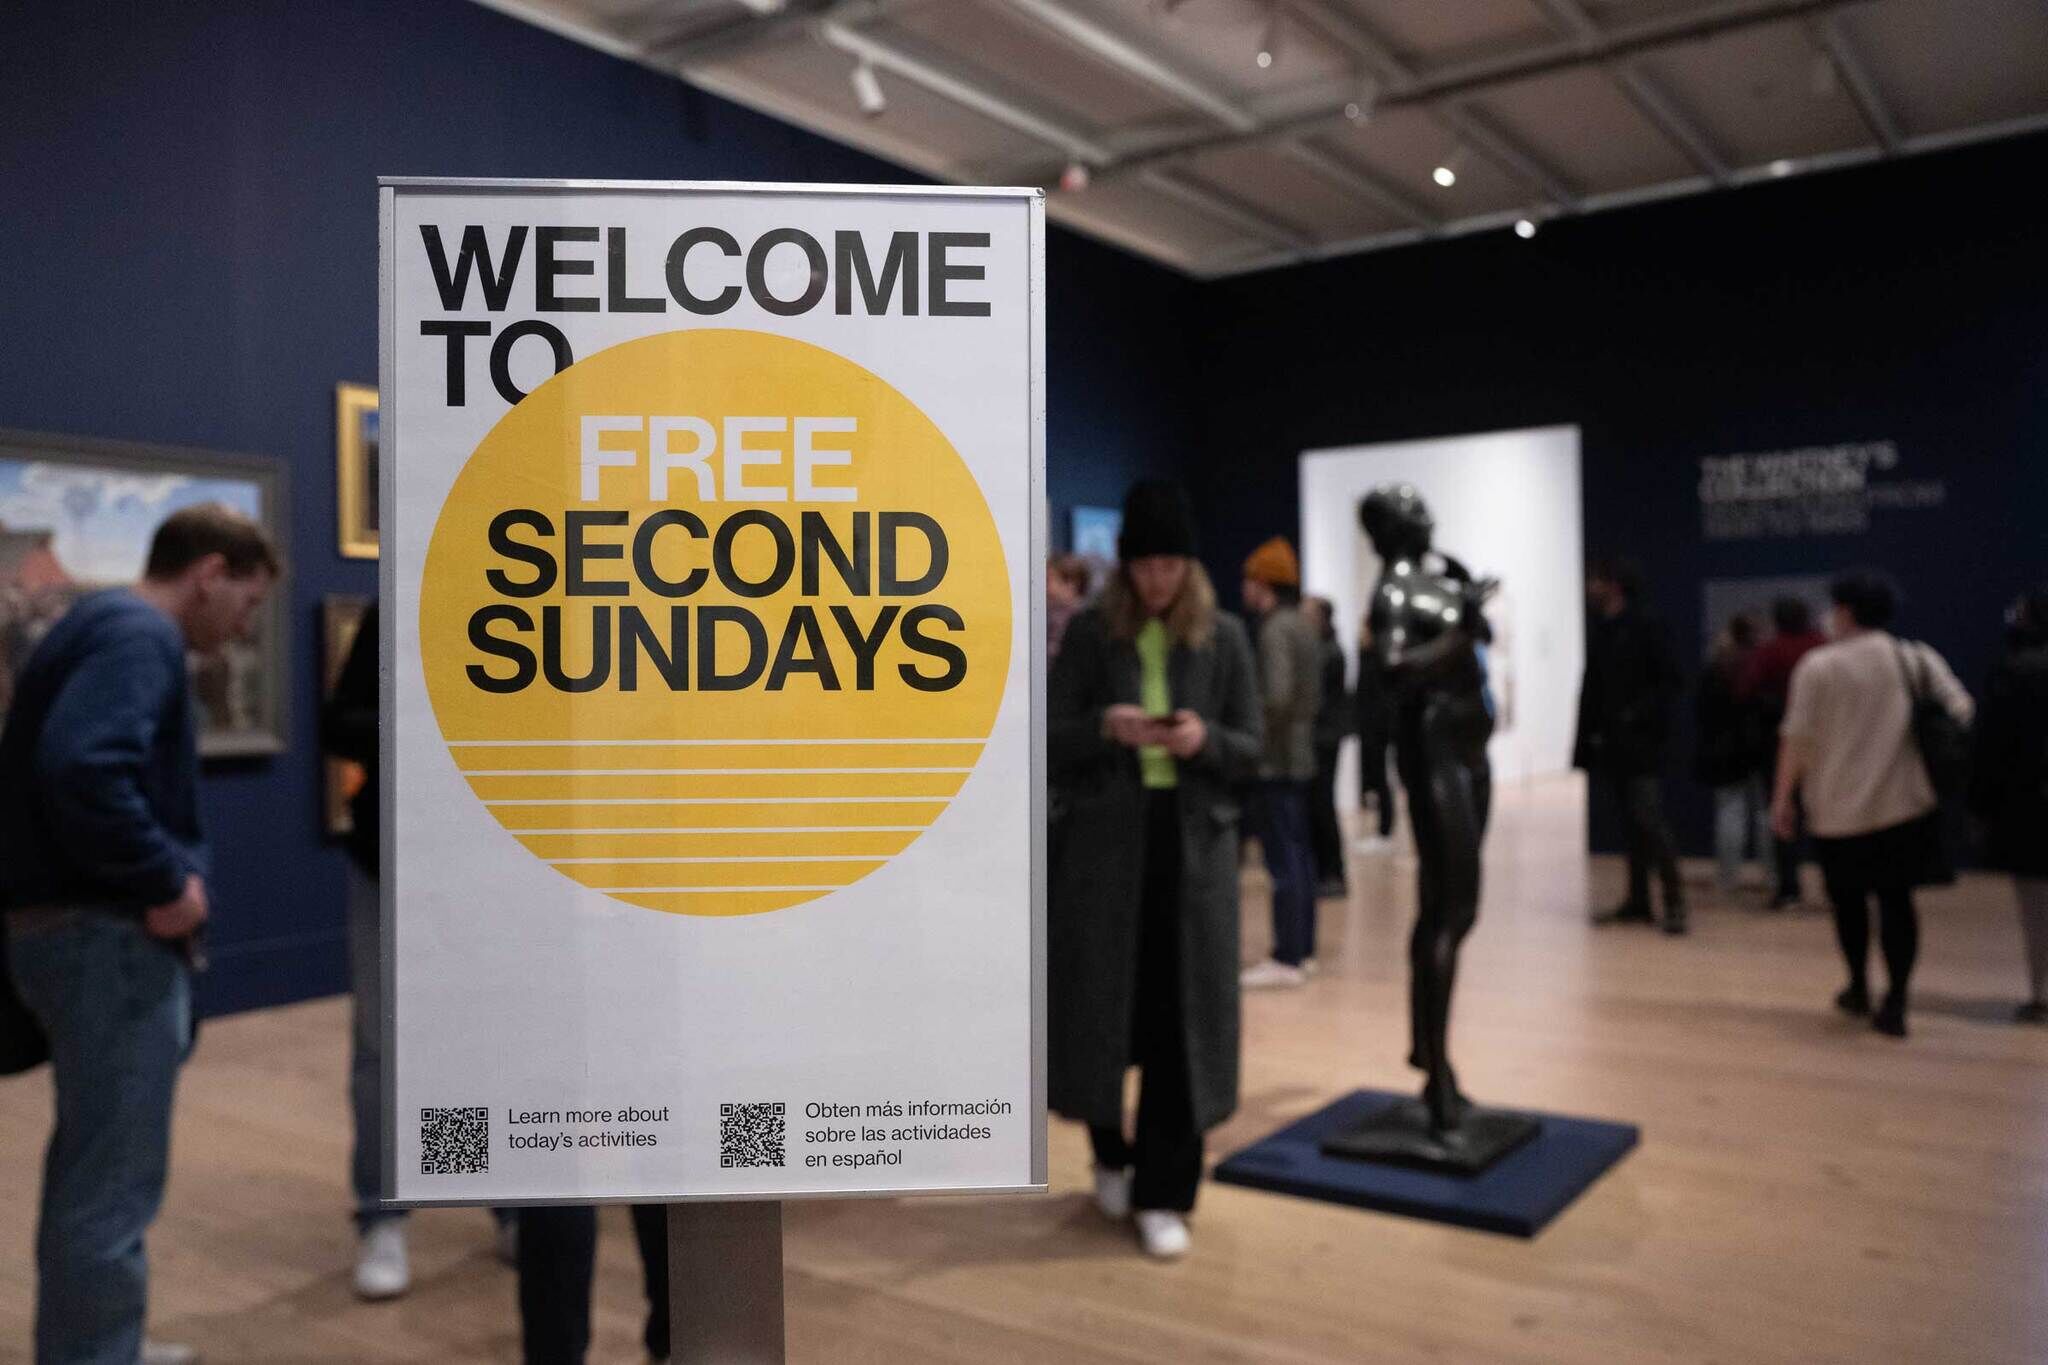 Sign reading "Welcome to Free Second Sundays" in a museum, with people viewing art and a statue in the background.